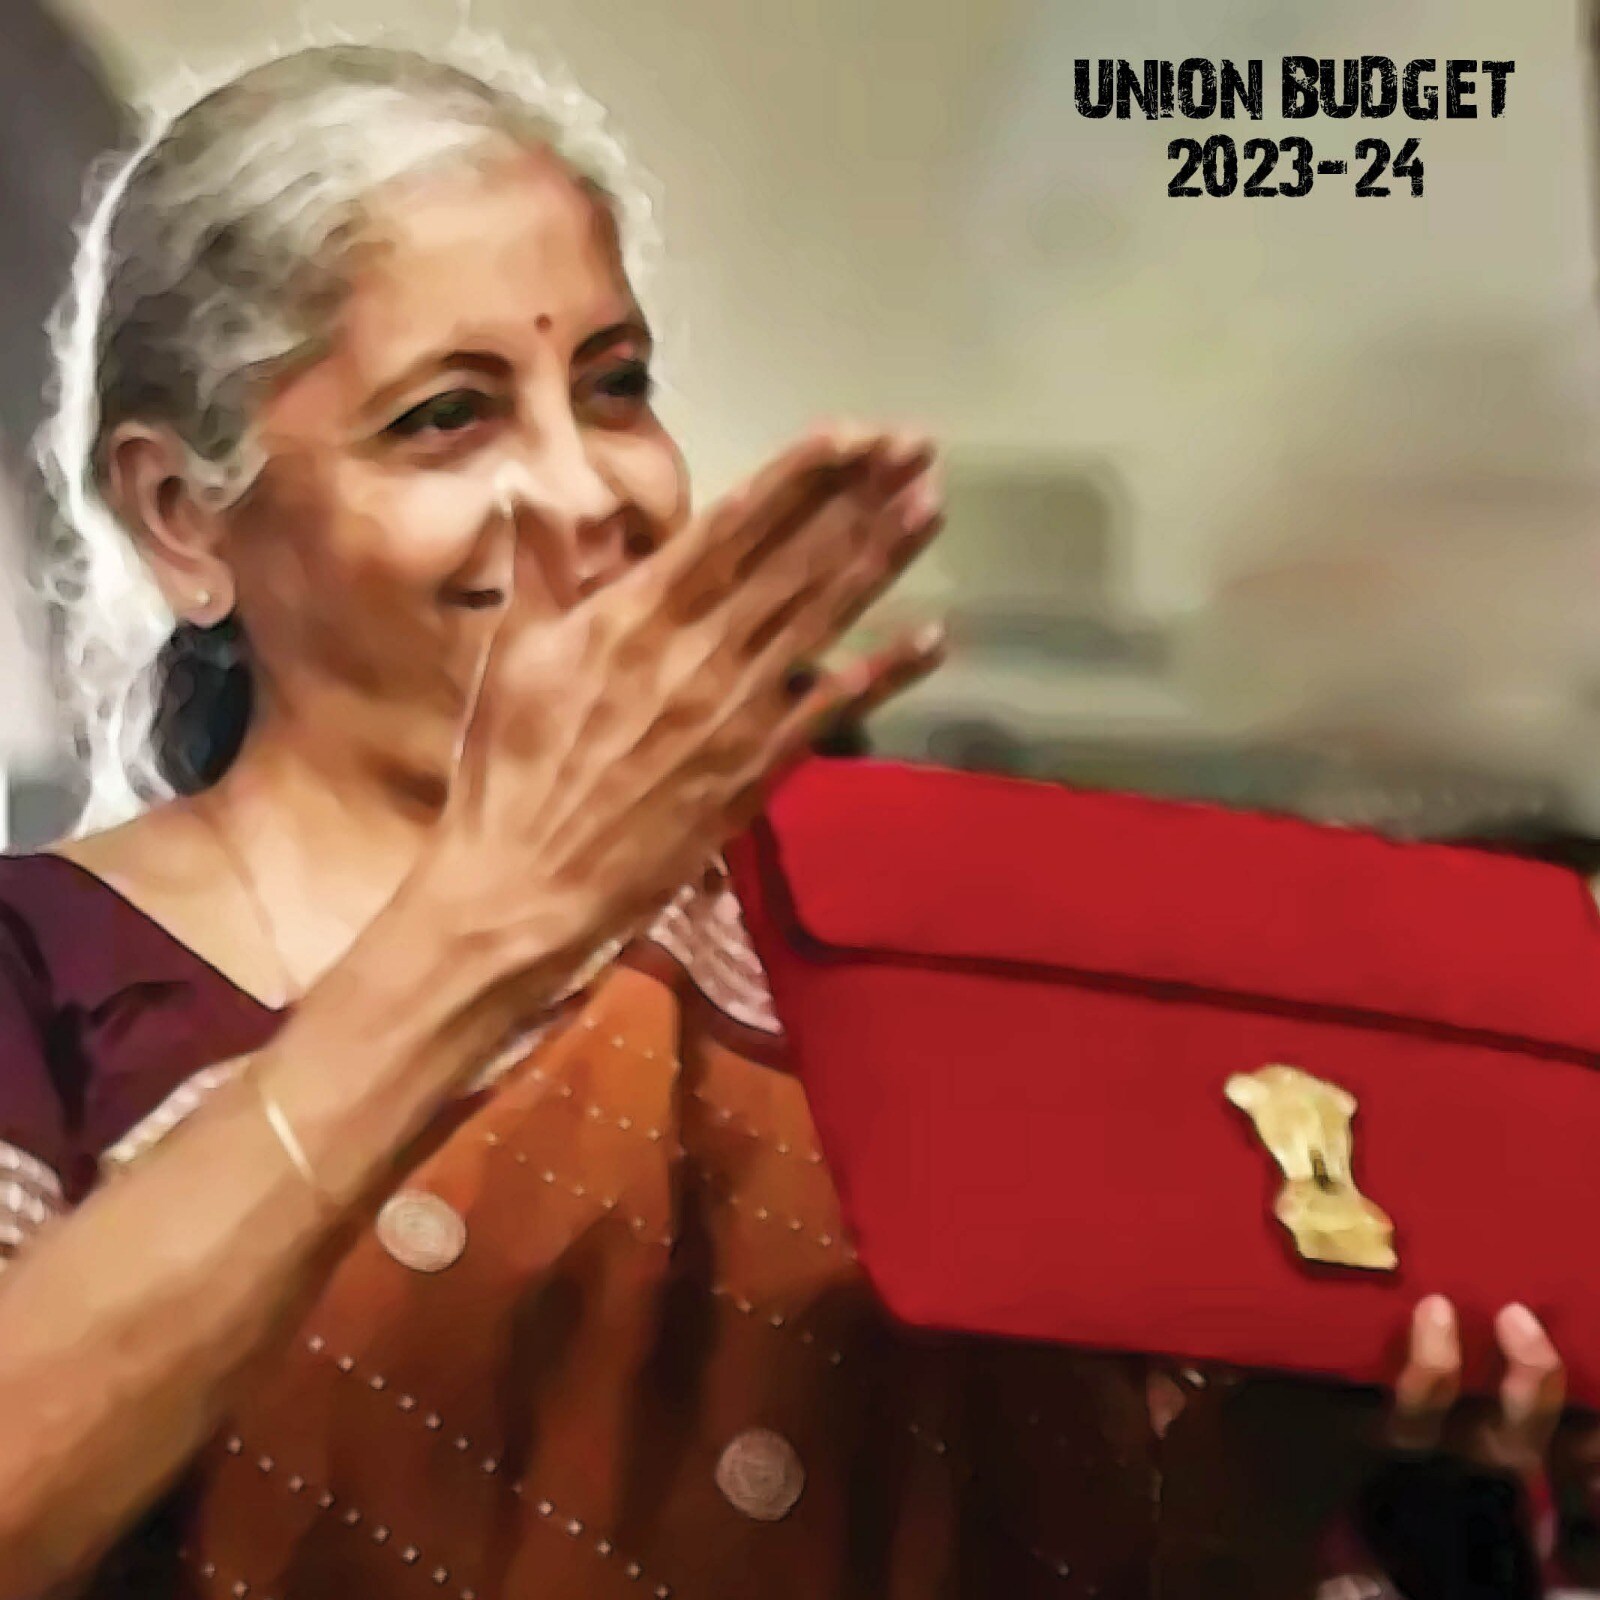 Budget 2023 likely to focus on Indian middle class, all eyes on FM Nirmala Sitharaman’s 11 am Parliament speech